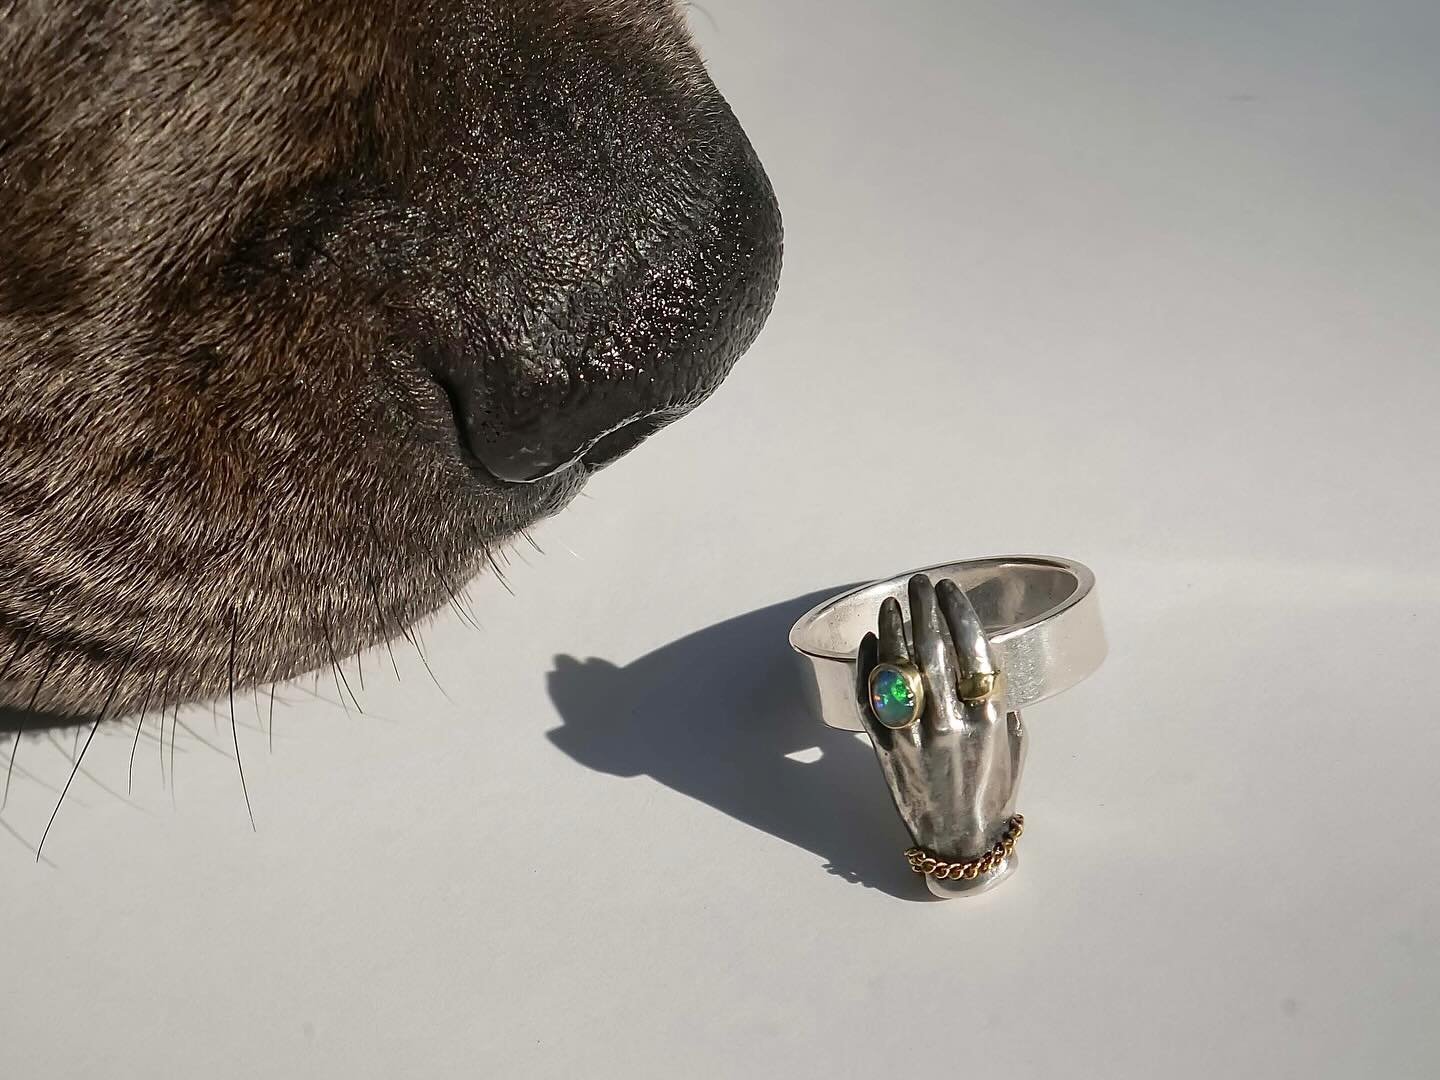 This pup nose best 🙃 Boogie sniffing the ring version of the Opal hand✋🏽 💍 if you like the ring design I&rsquo;d love to do a strong stone so a custom sapphire or something in color or a diamond would be nice! DM me to talk custom or you can email